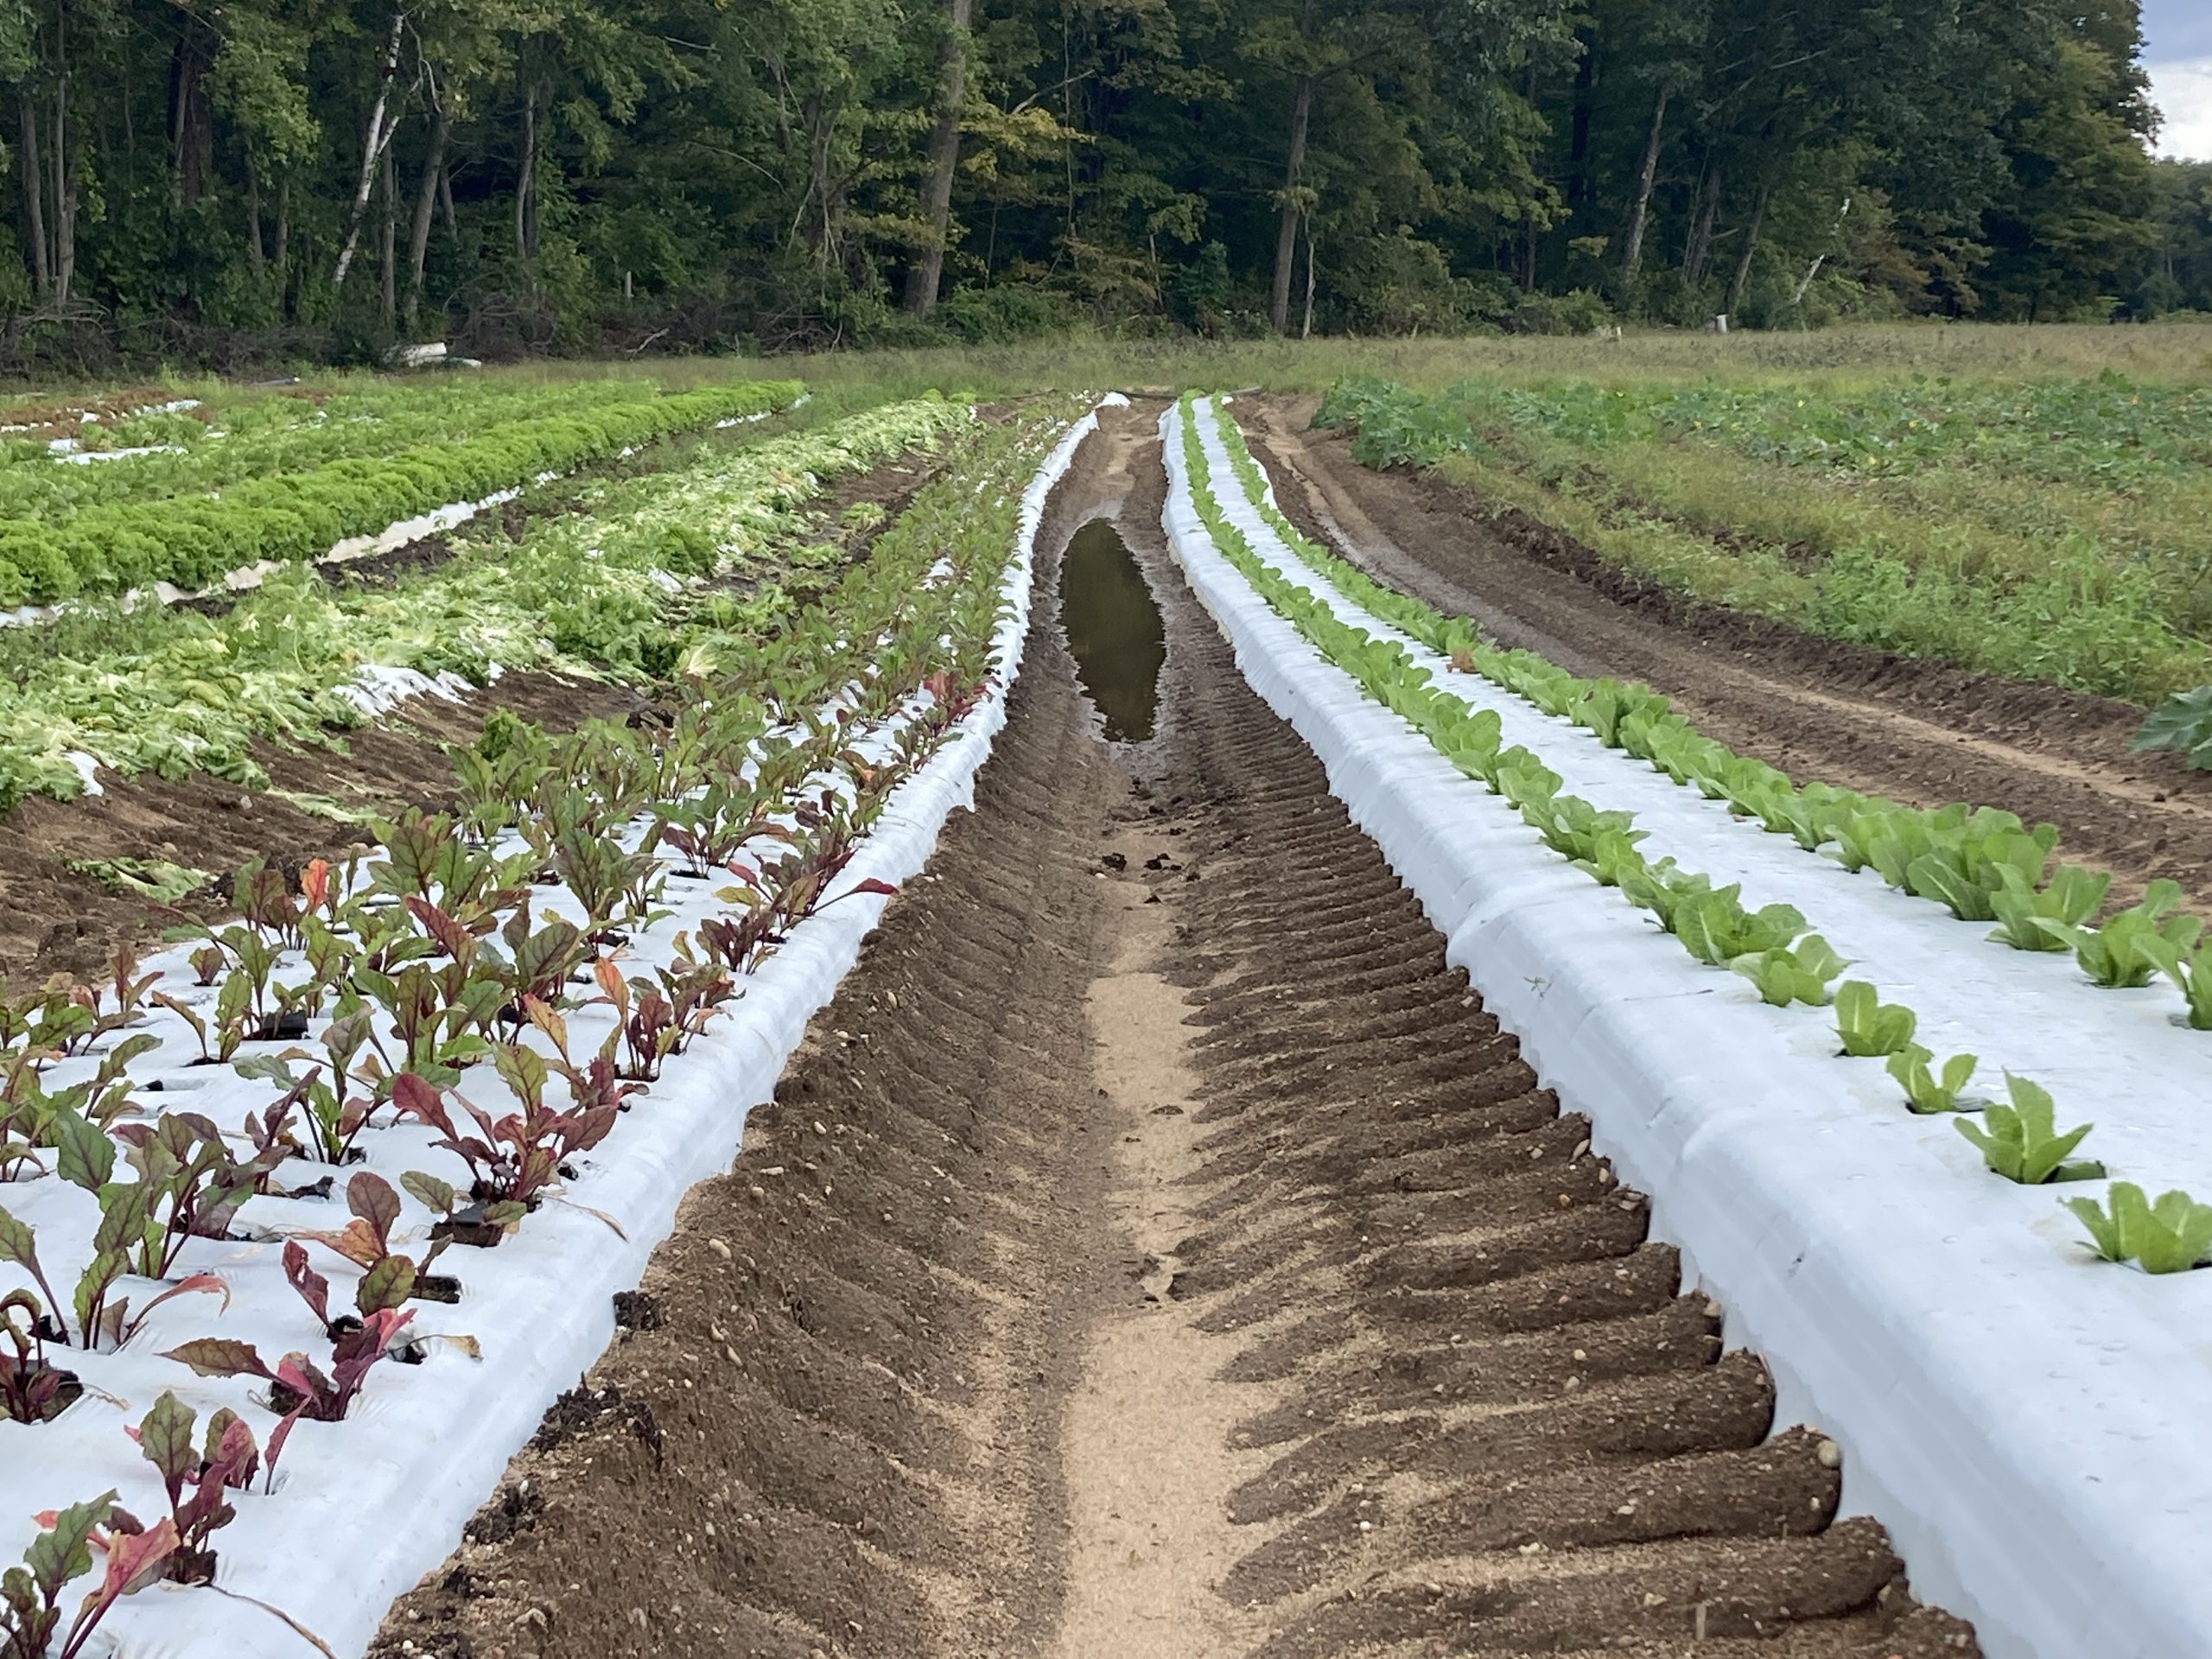 water pooling in the rows between vegetable crops growing under white biodegradable mulch